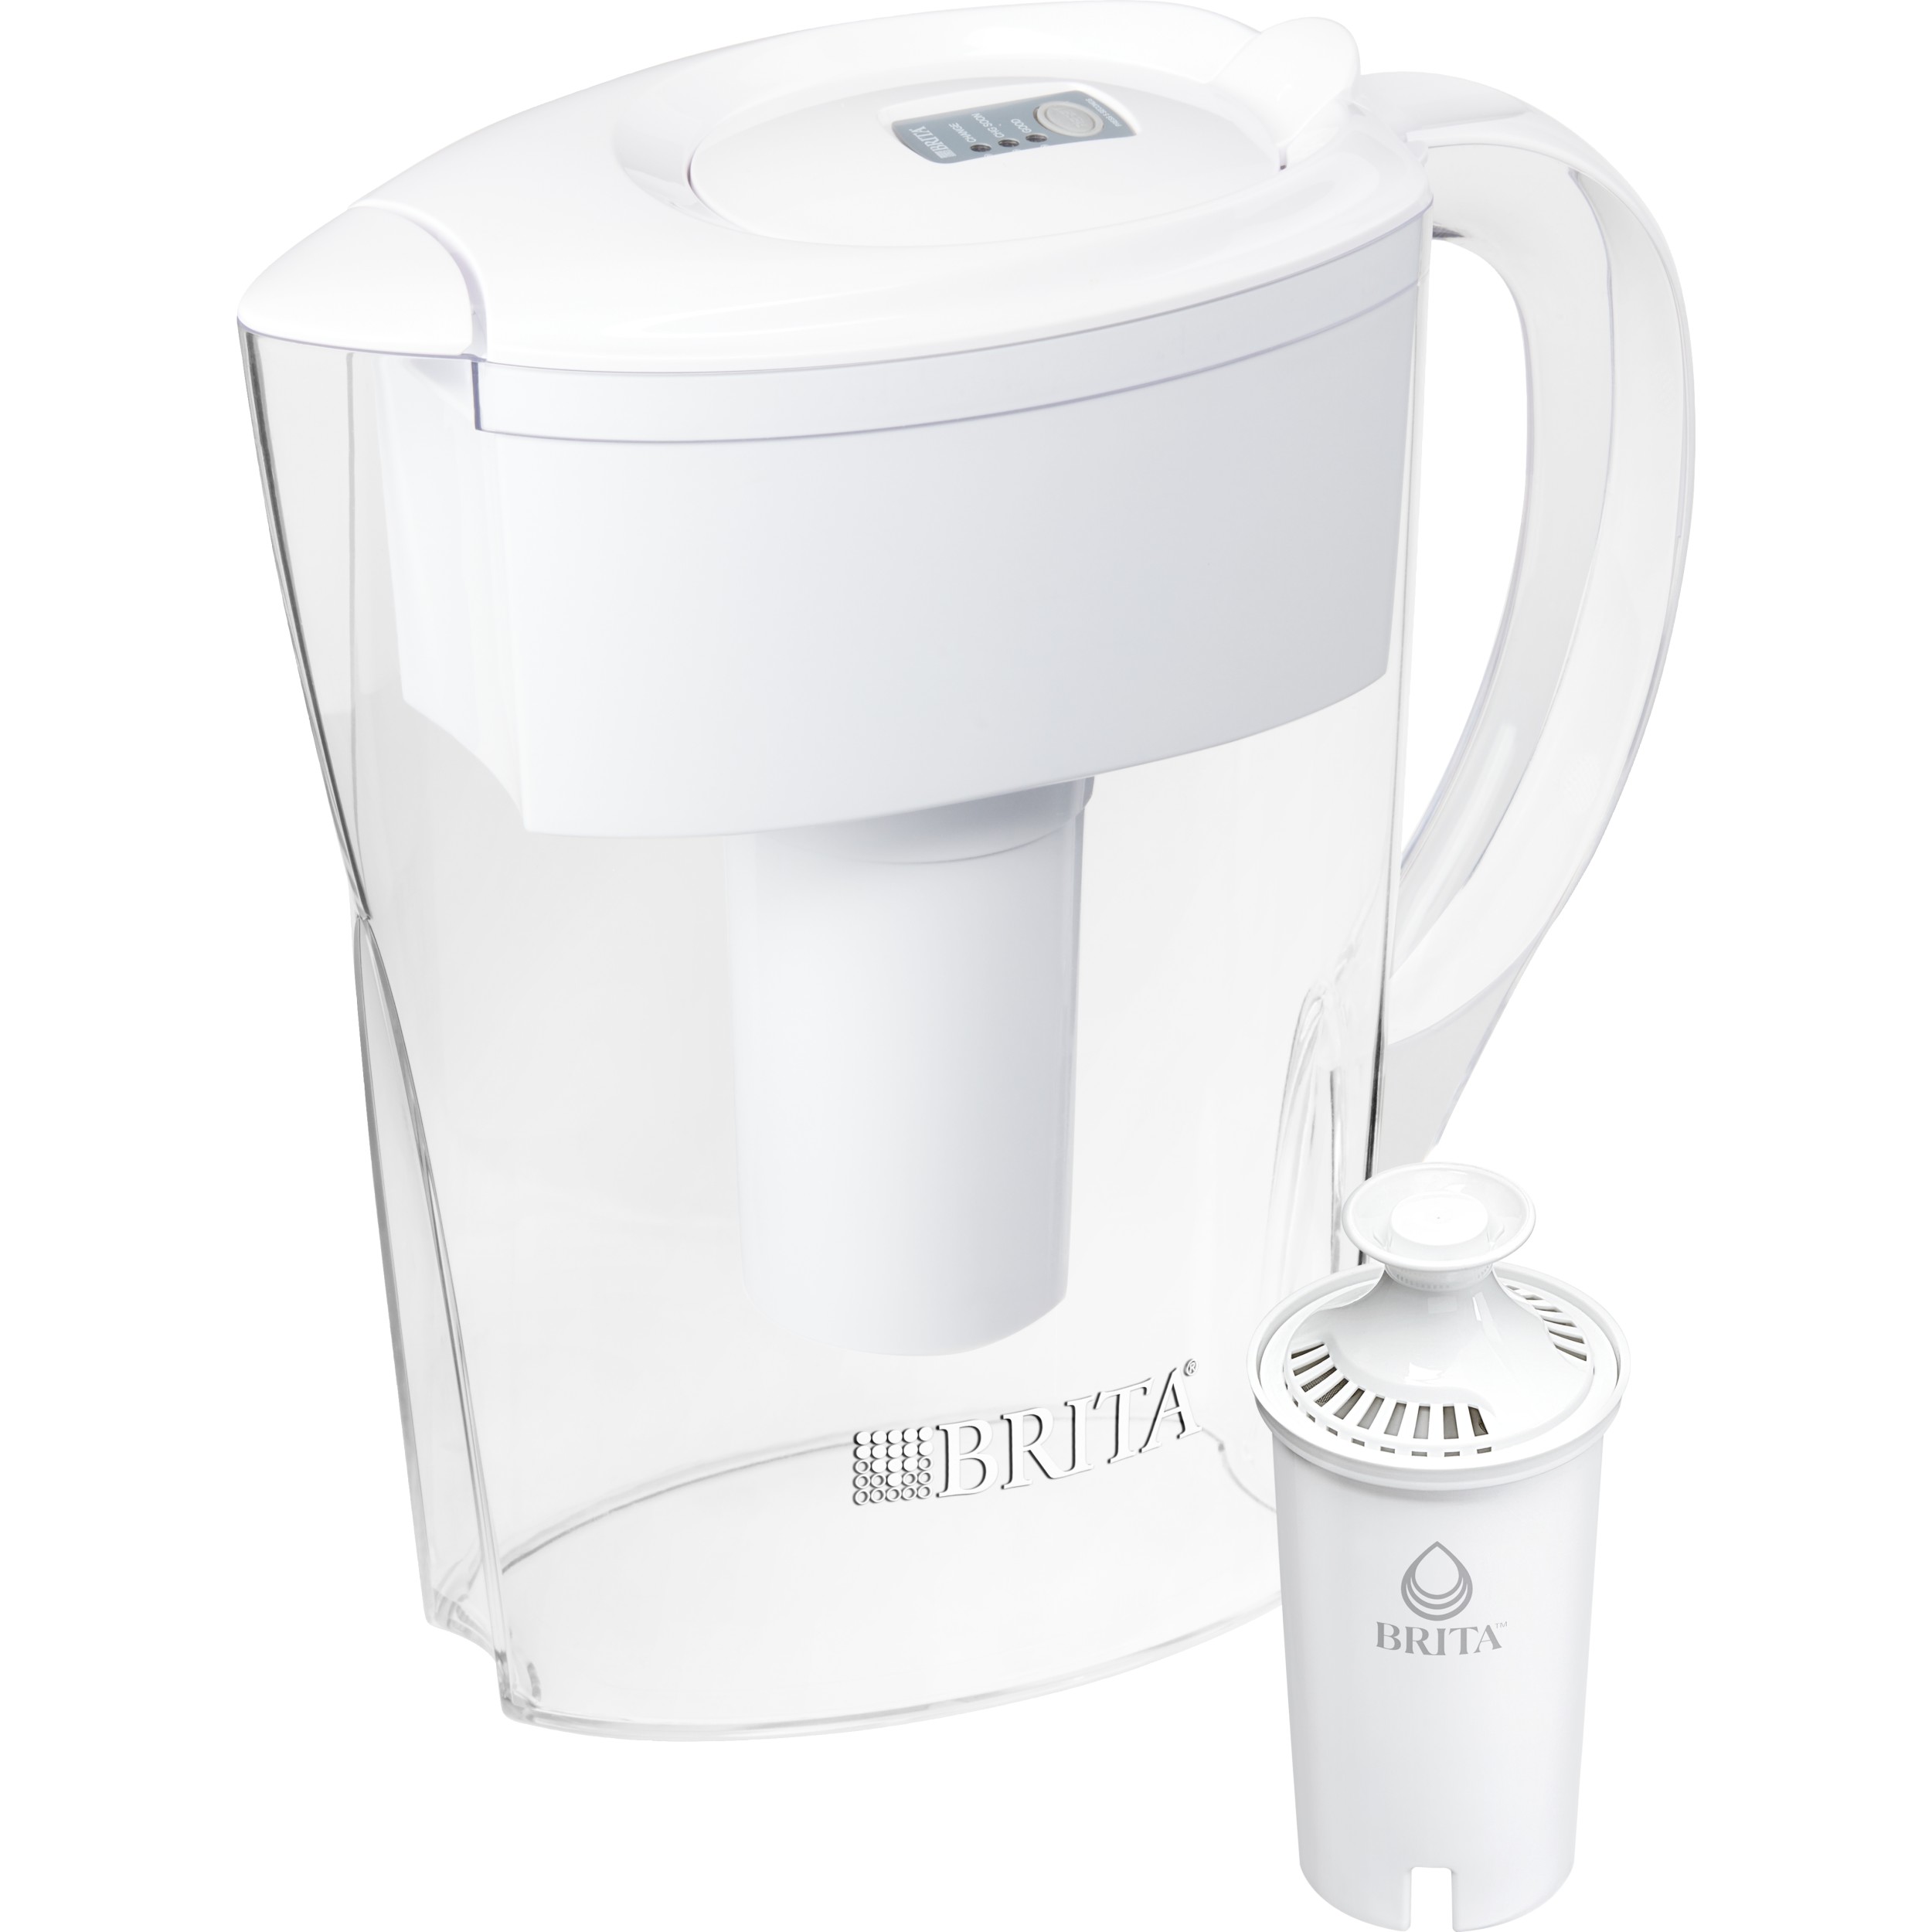 Brita Small 6 Cup Space Saver Water Filter Pitcher with 1 Standard Filter, Made Without BPA, Space Saver, White - image 1 of 10